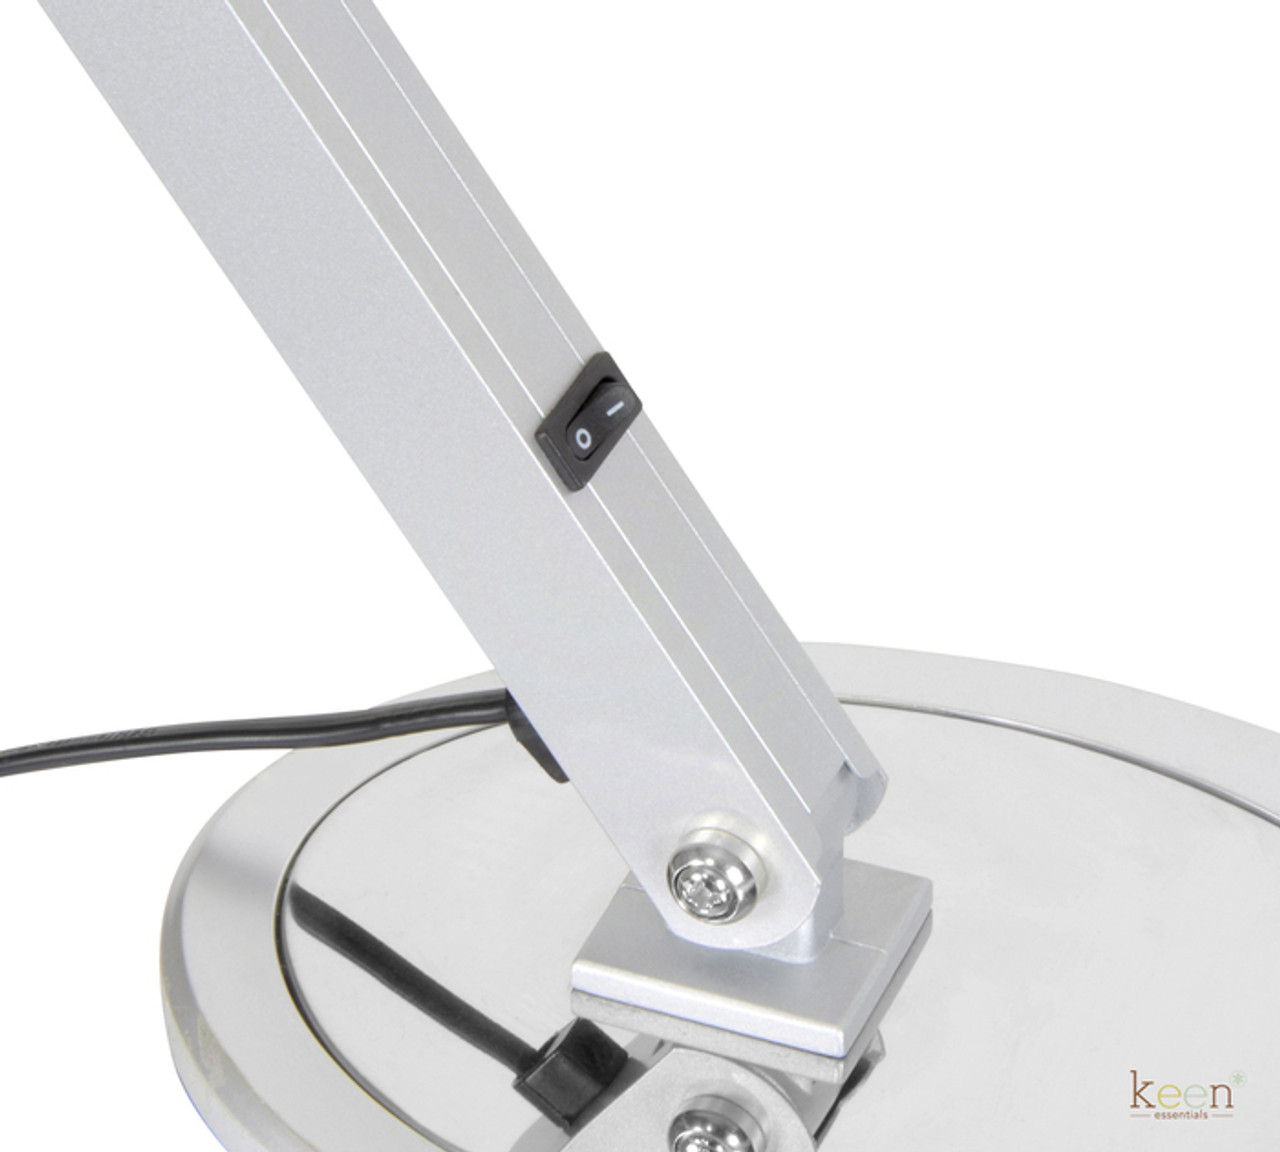 Slimflex LED Table Lamp by Keen – Nail Company Wholesale Supply, Inc